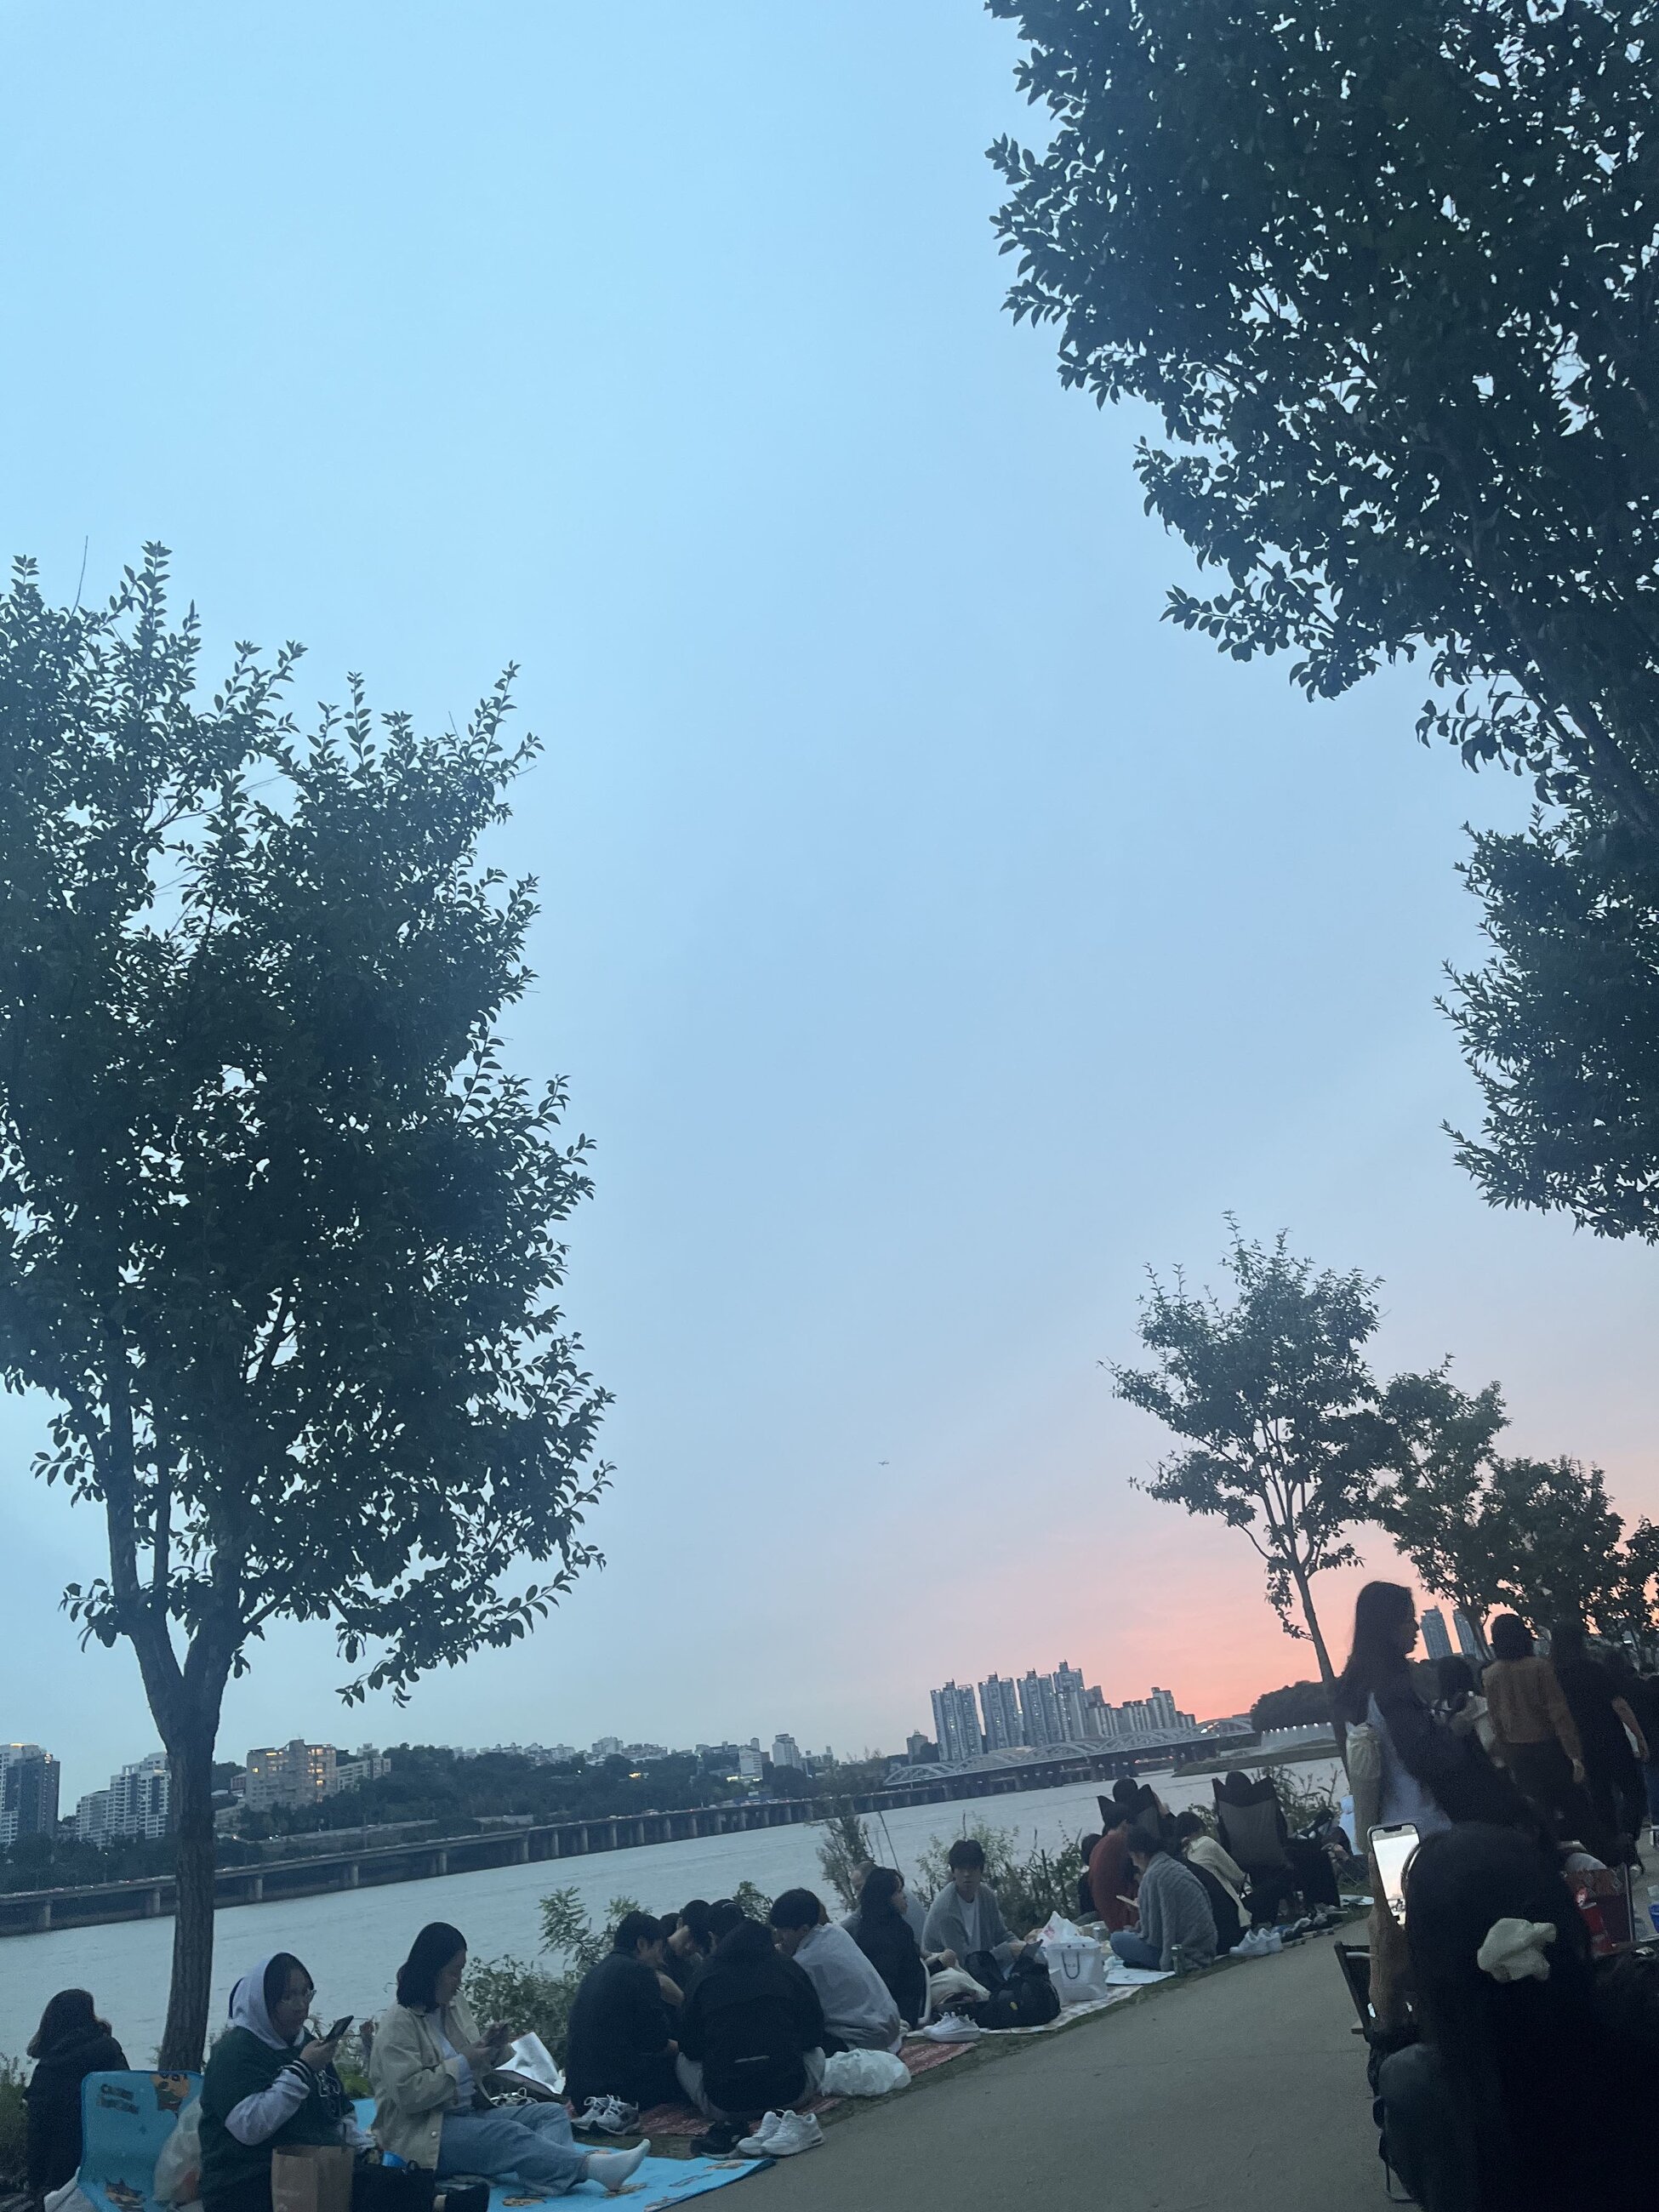 This was along the Han River with friends! we were waiting to watch a firework show and there were a ton of people there.